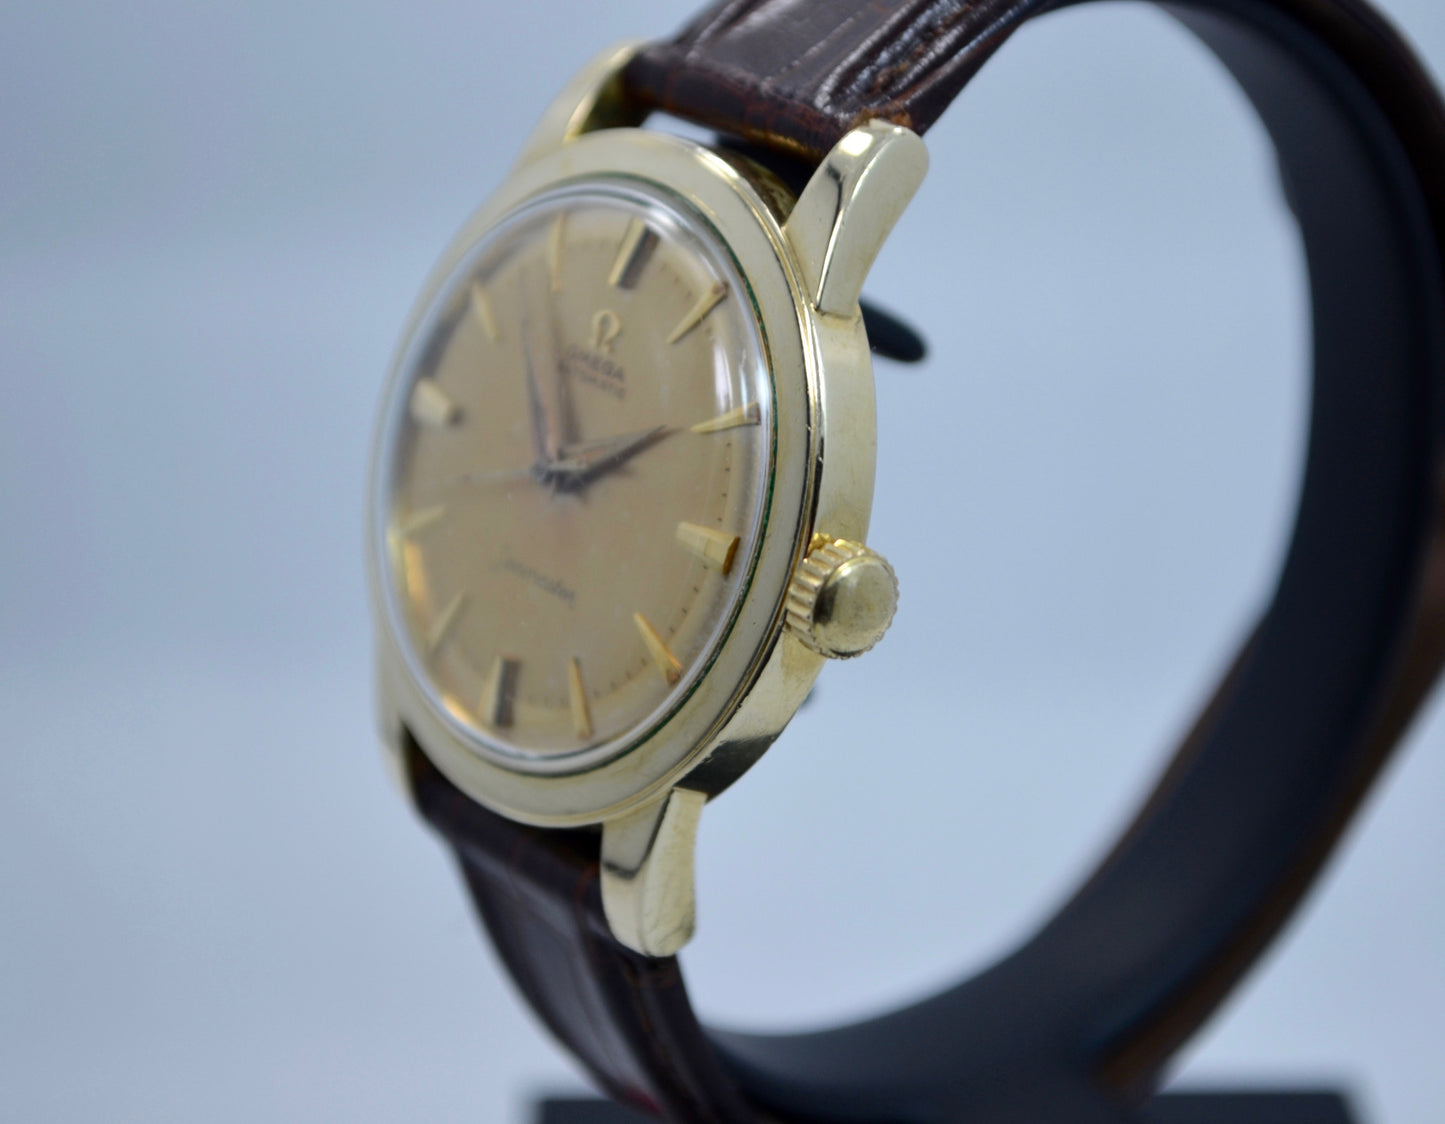 Vintage Omega Seamaster 6250 Gold Filled Automatic Cal. 500 Wristwatch 1950's - Hashtag Watch Company